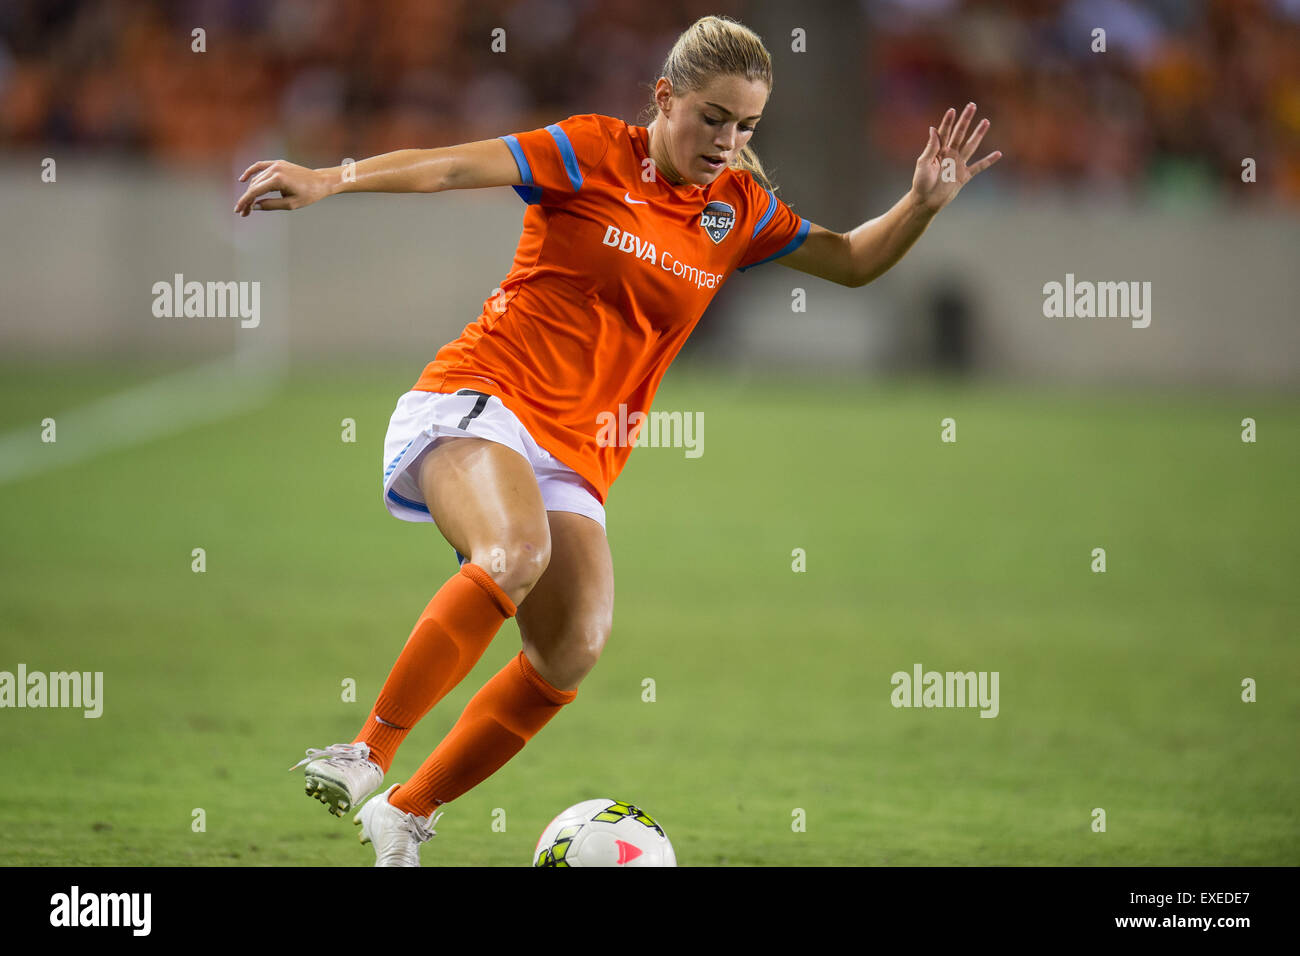 Houston, Texas, USA. 12th July, 2015. Houston Dash forward Kealia Ohai (7) controls the ball during the 2nd half of an NWSL game between the Houston Dash and the Chicago Red Stars at BBVA Compass Stadium in Houston, TX on July 12th, 2015. © Trask Smith/ZUMA Wire/Alamy Live News Stock Photo